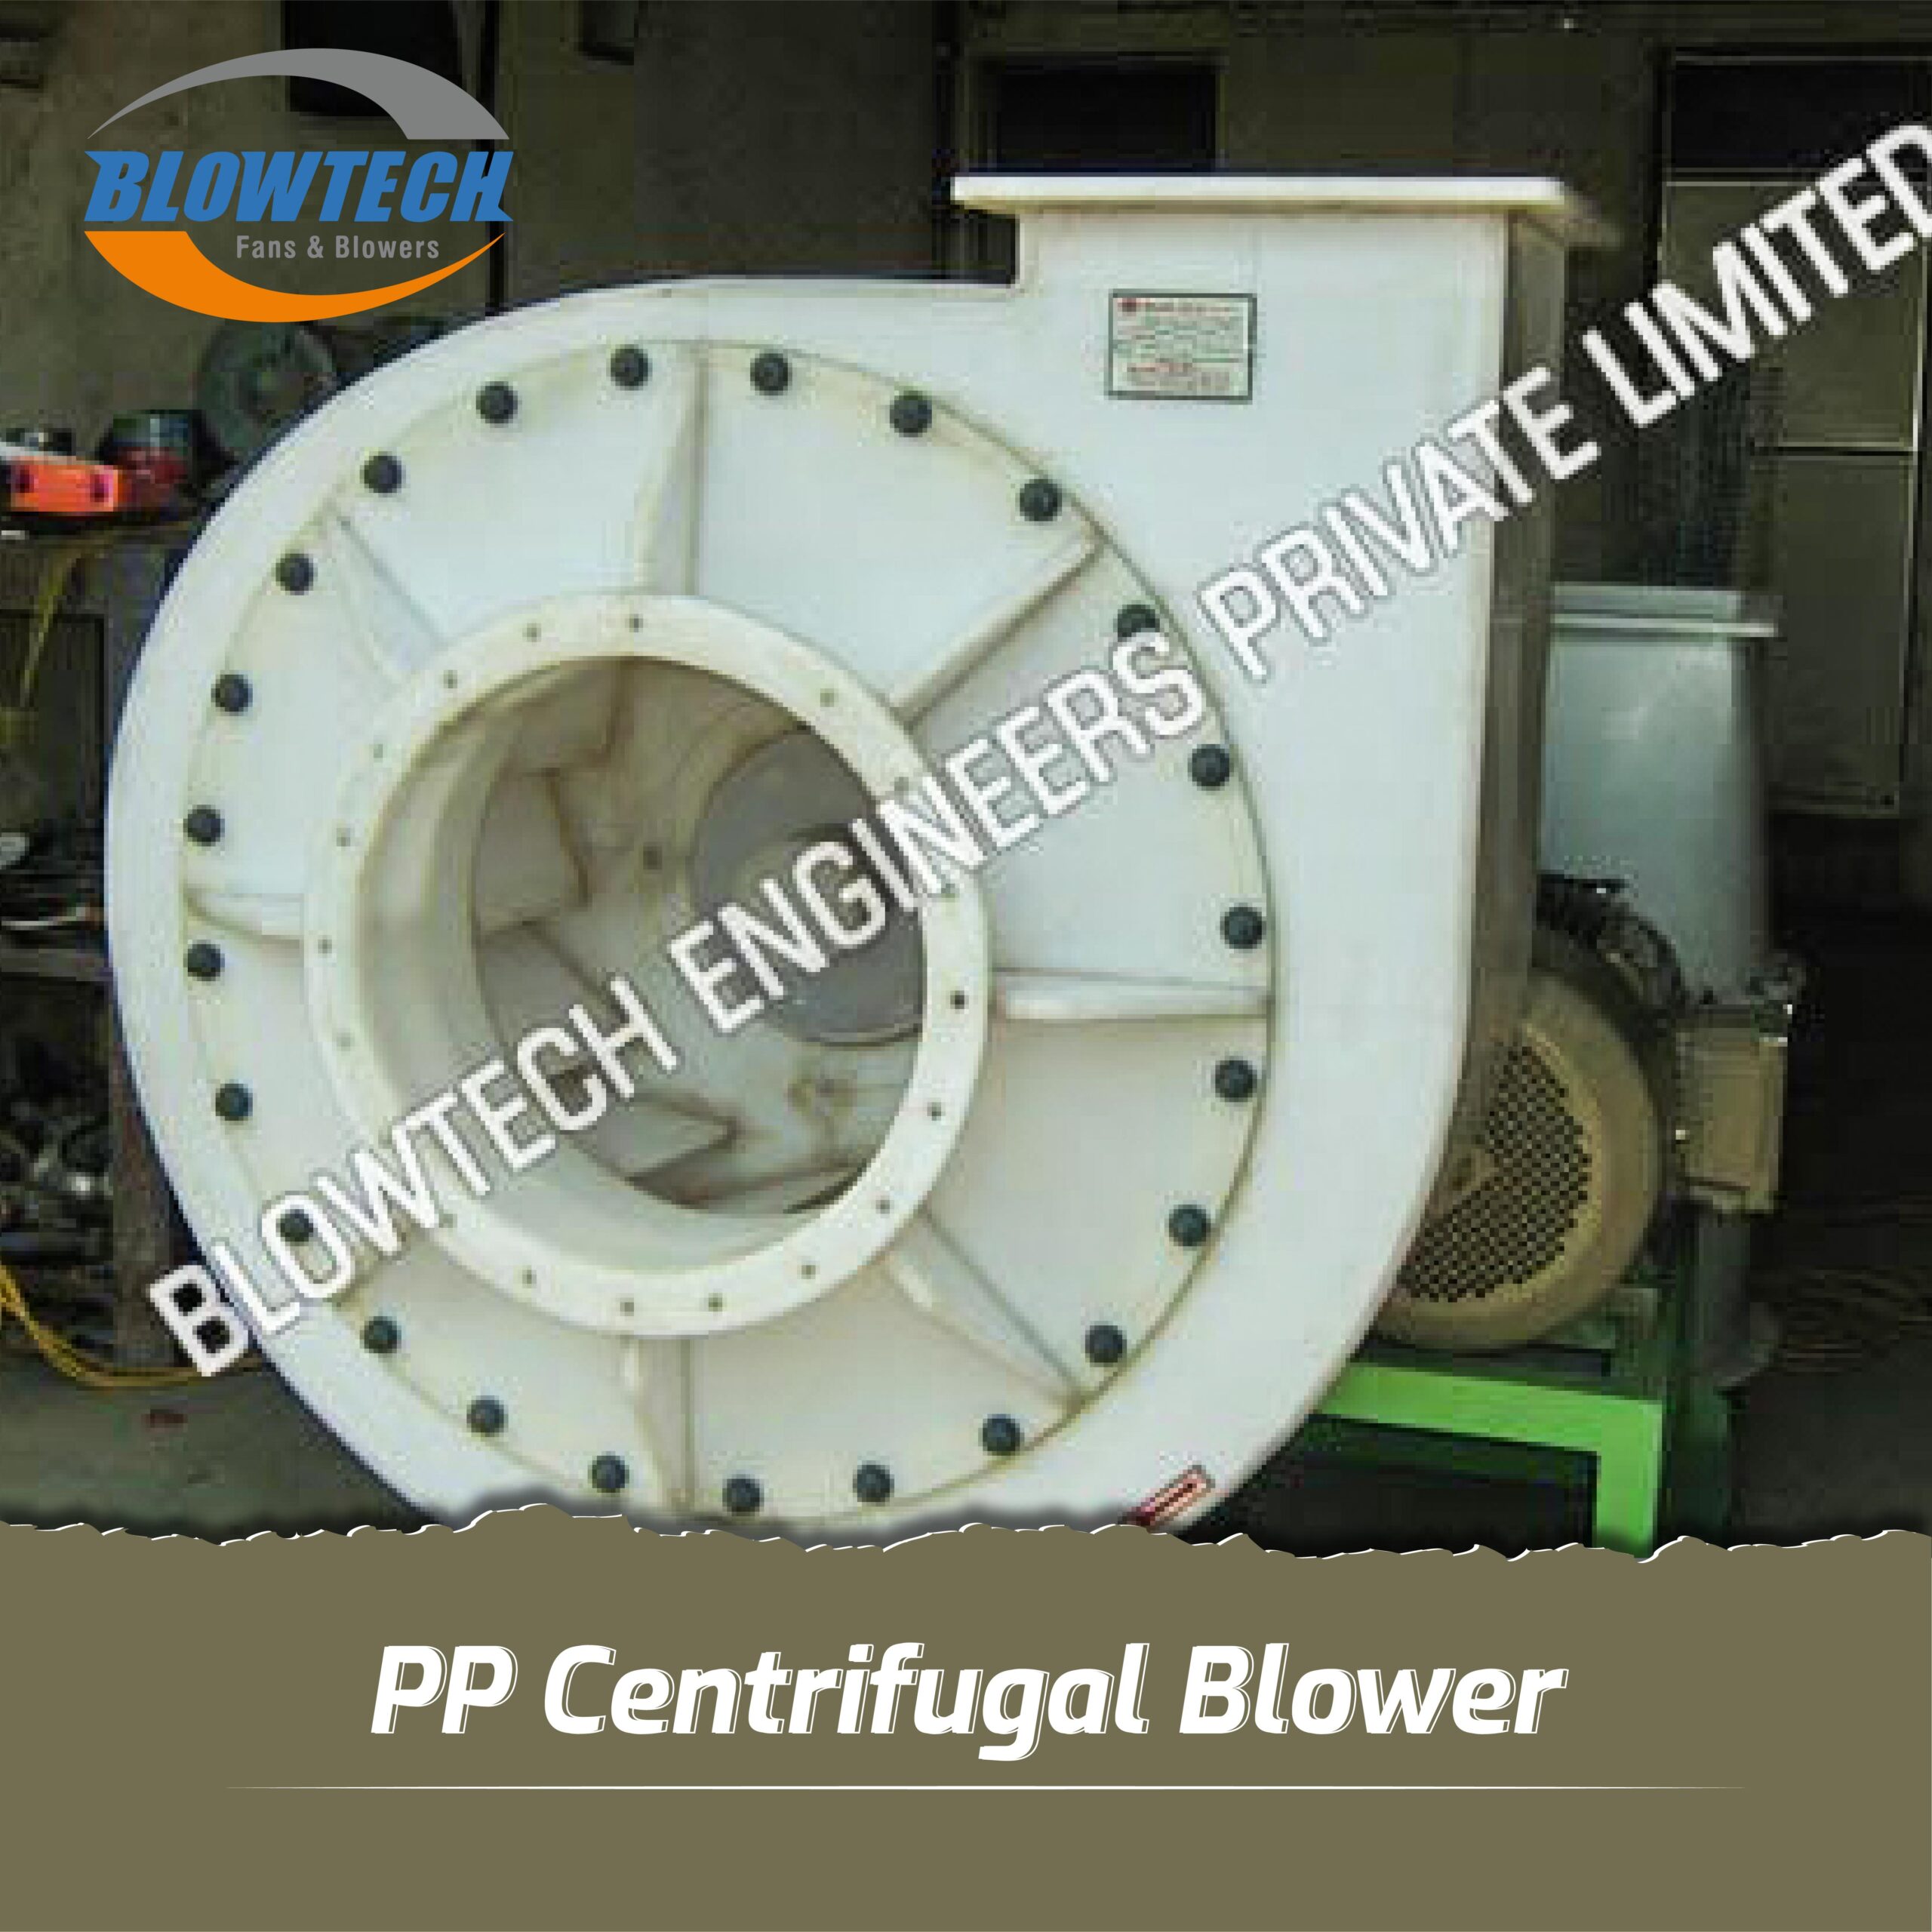 PP Centrifugal Blower  manufacturer, supplier and exporter in Mumbai, India